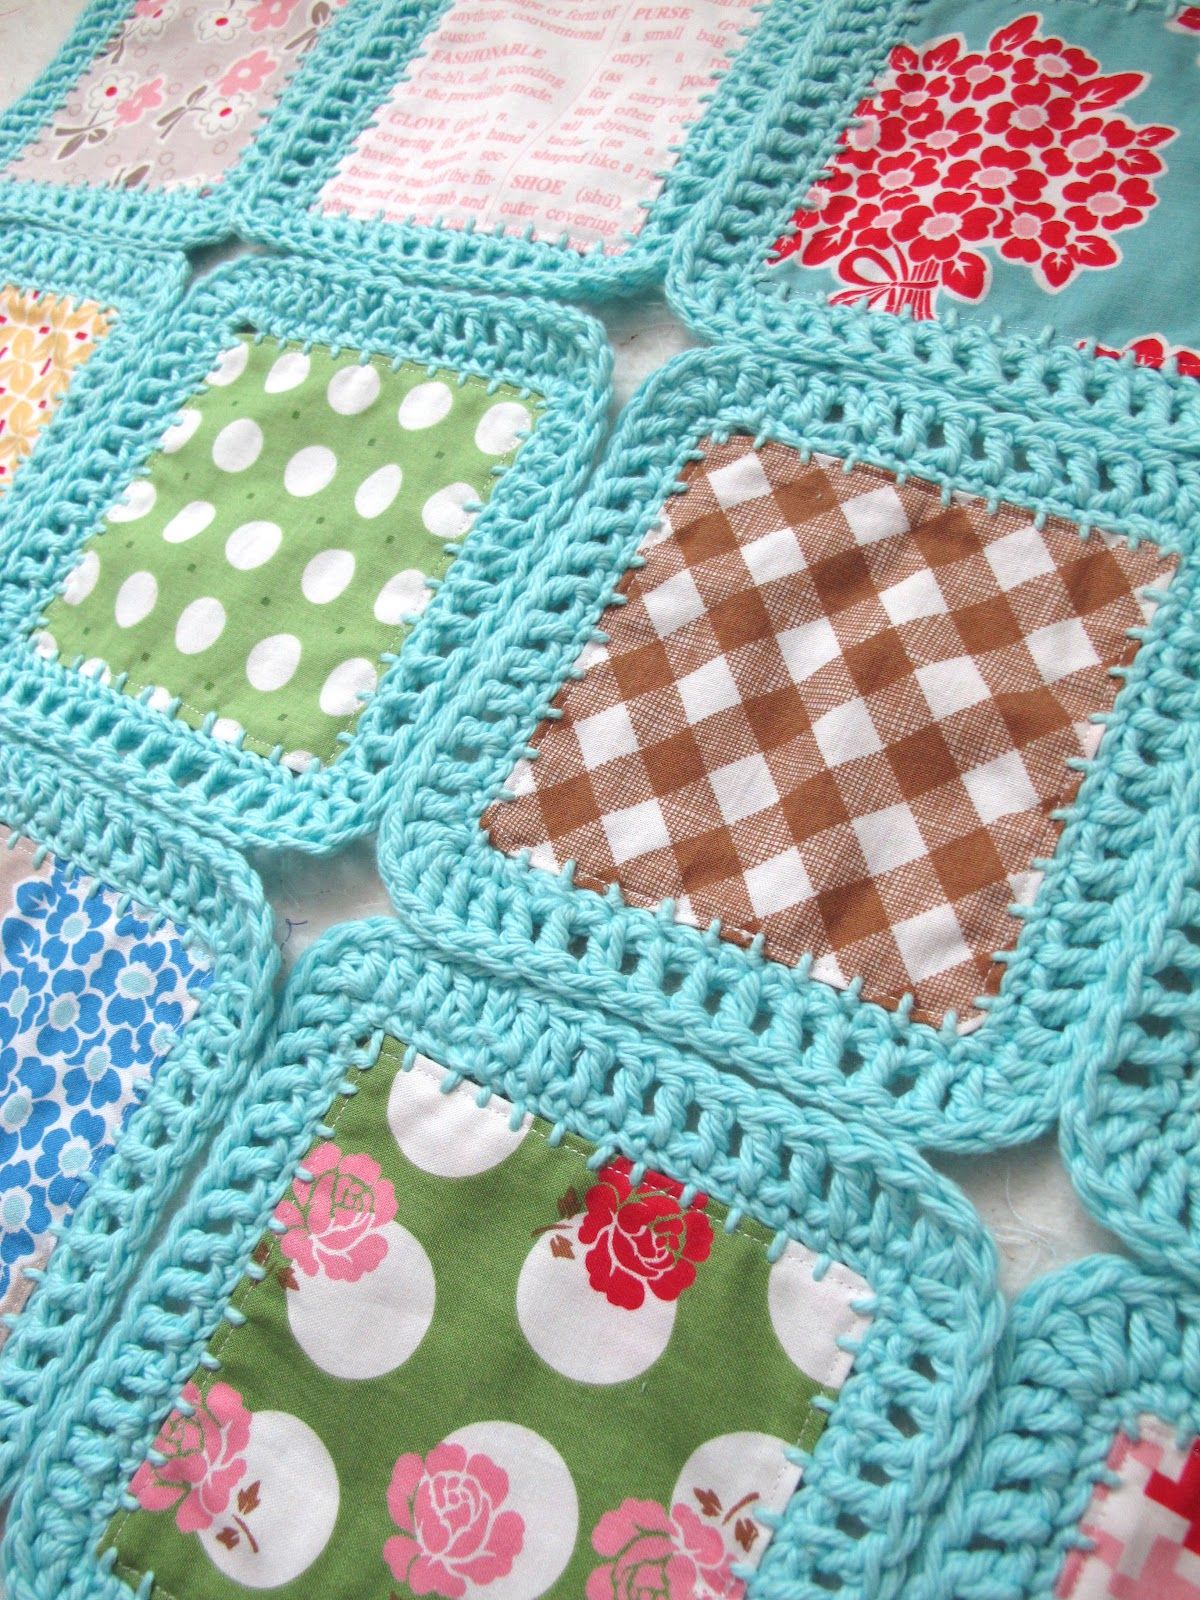 Fabric and Crochet Blanket – will need to make this!